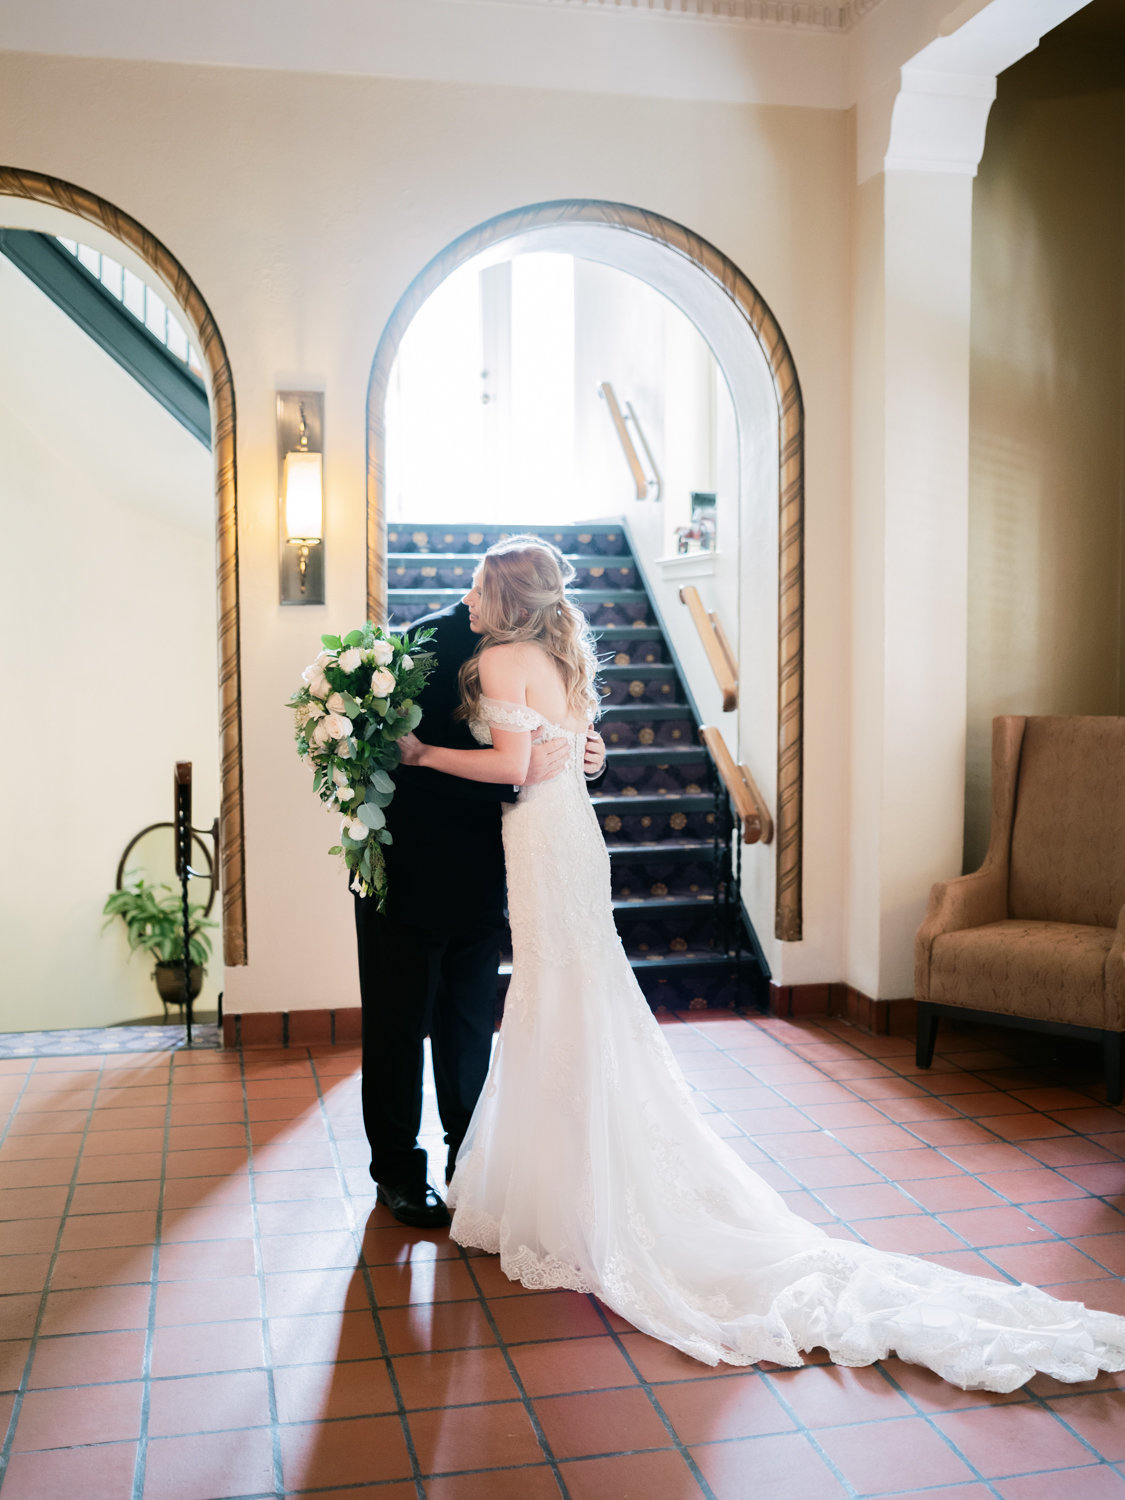 Jacqueline Anne Photography - amanda and brent-29